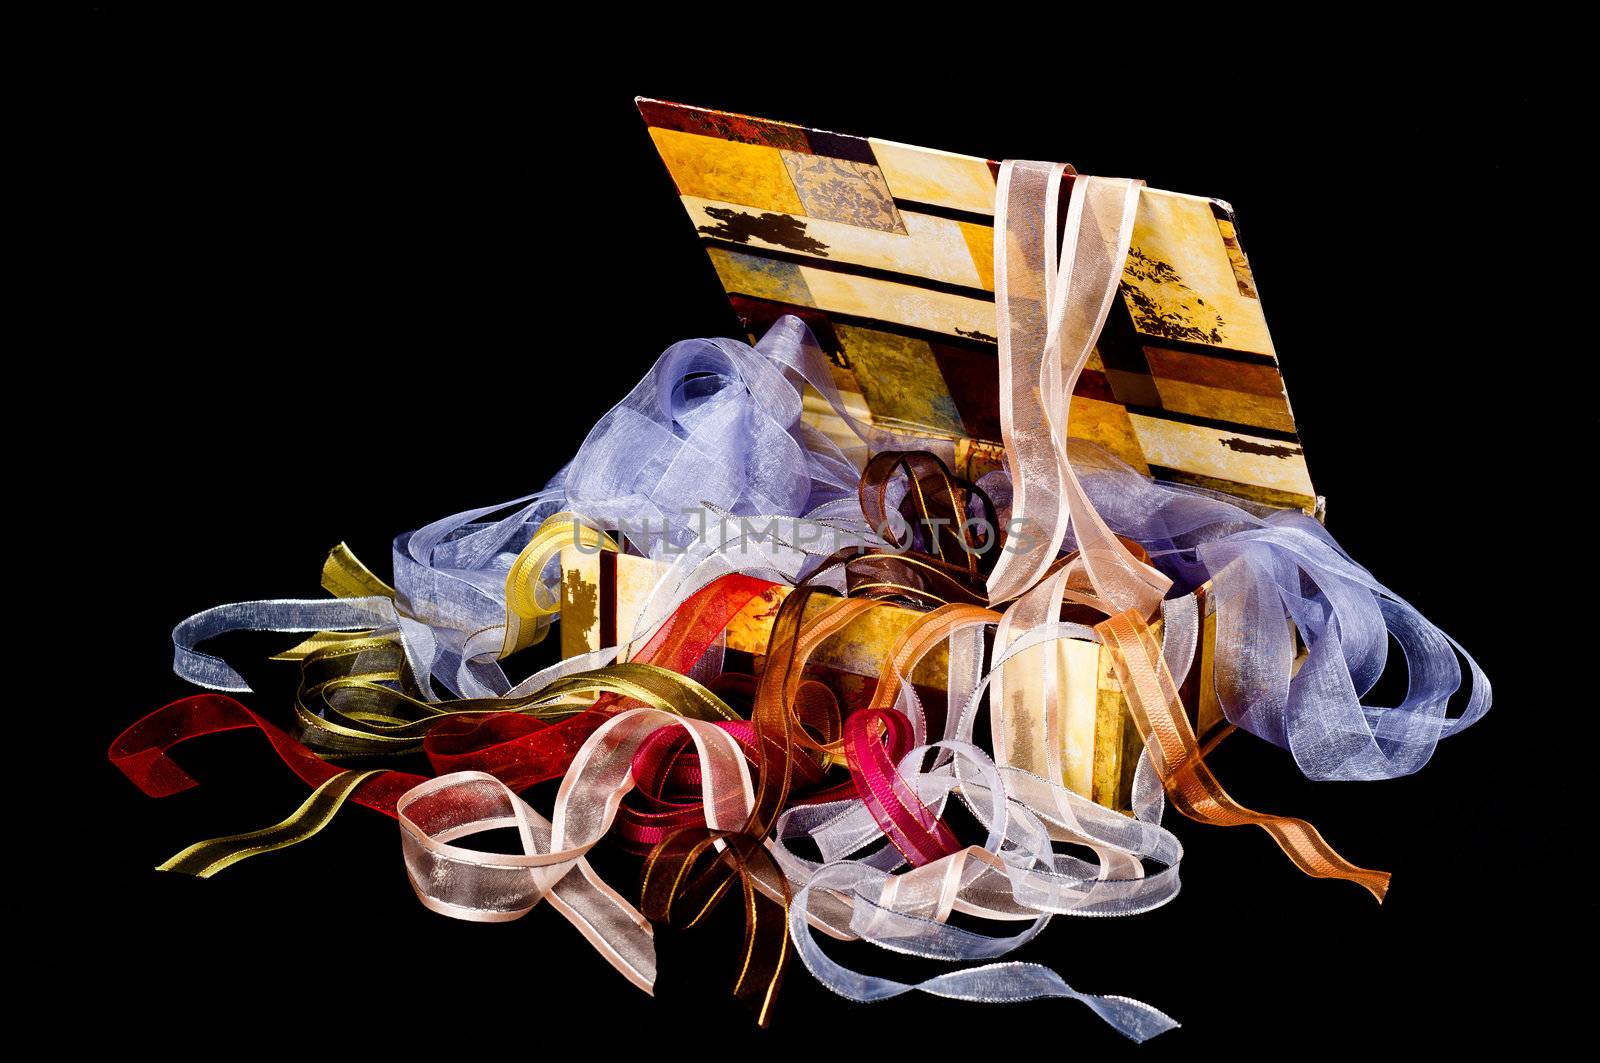 Box of Ribbons by timh